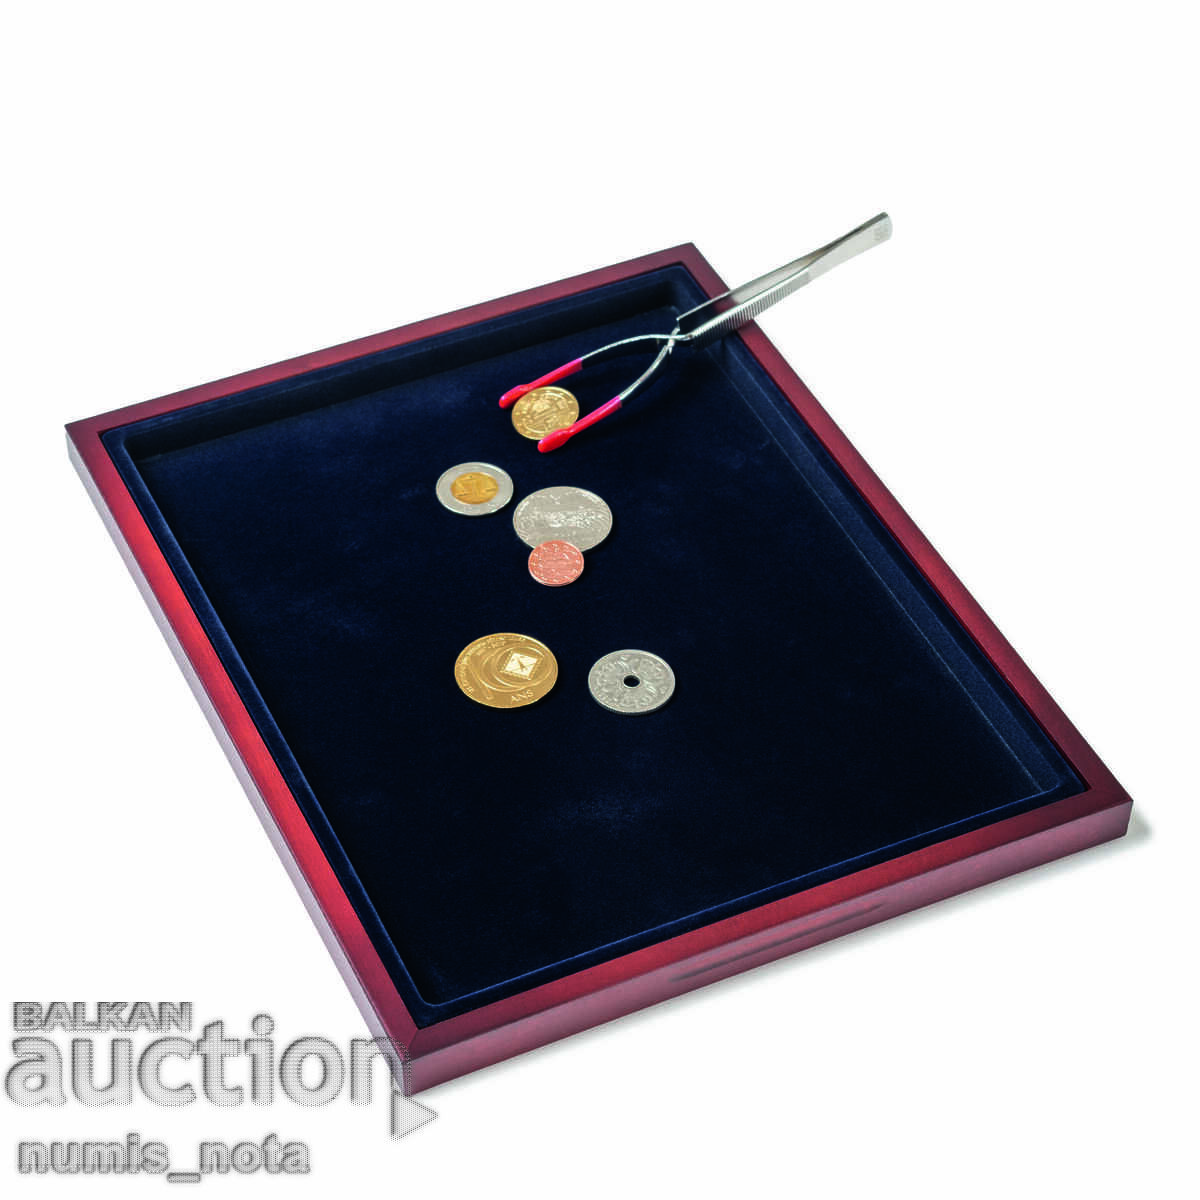 BUTLER coin trays for presenting and working with coins